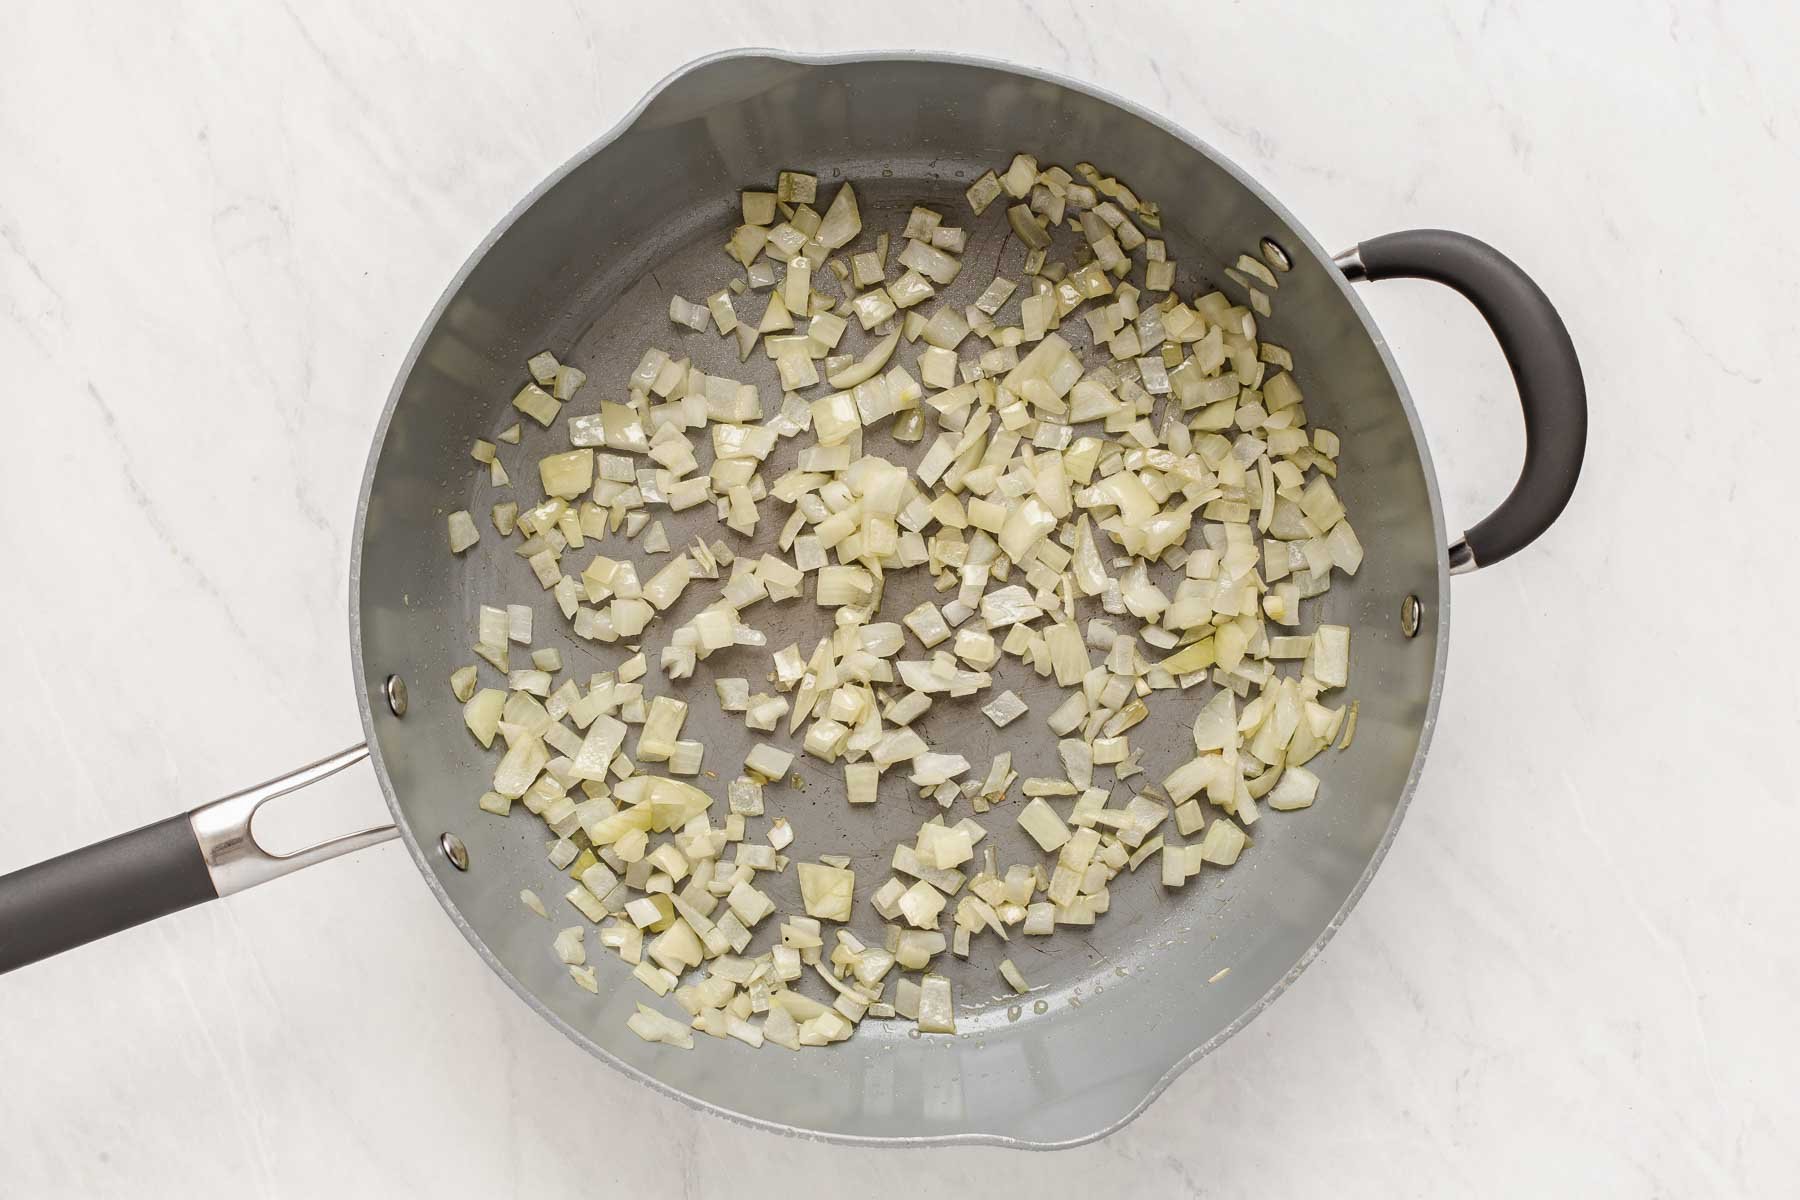 Diced onion being sauteed in grey skillet.